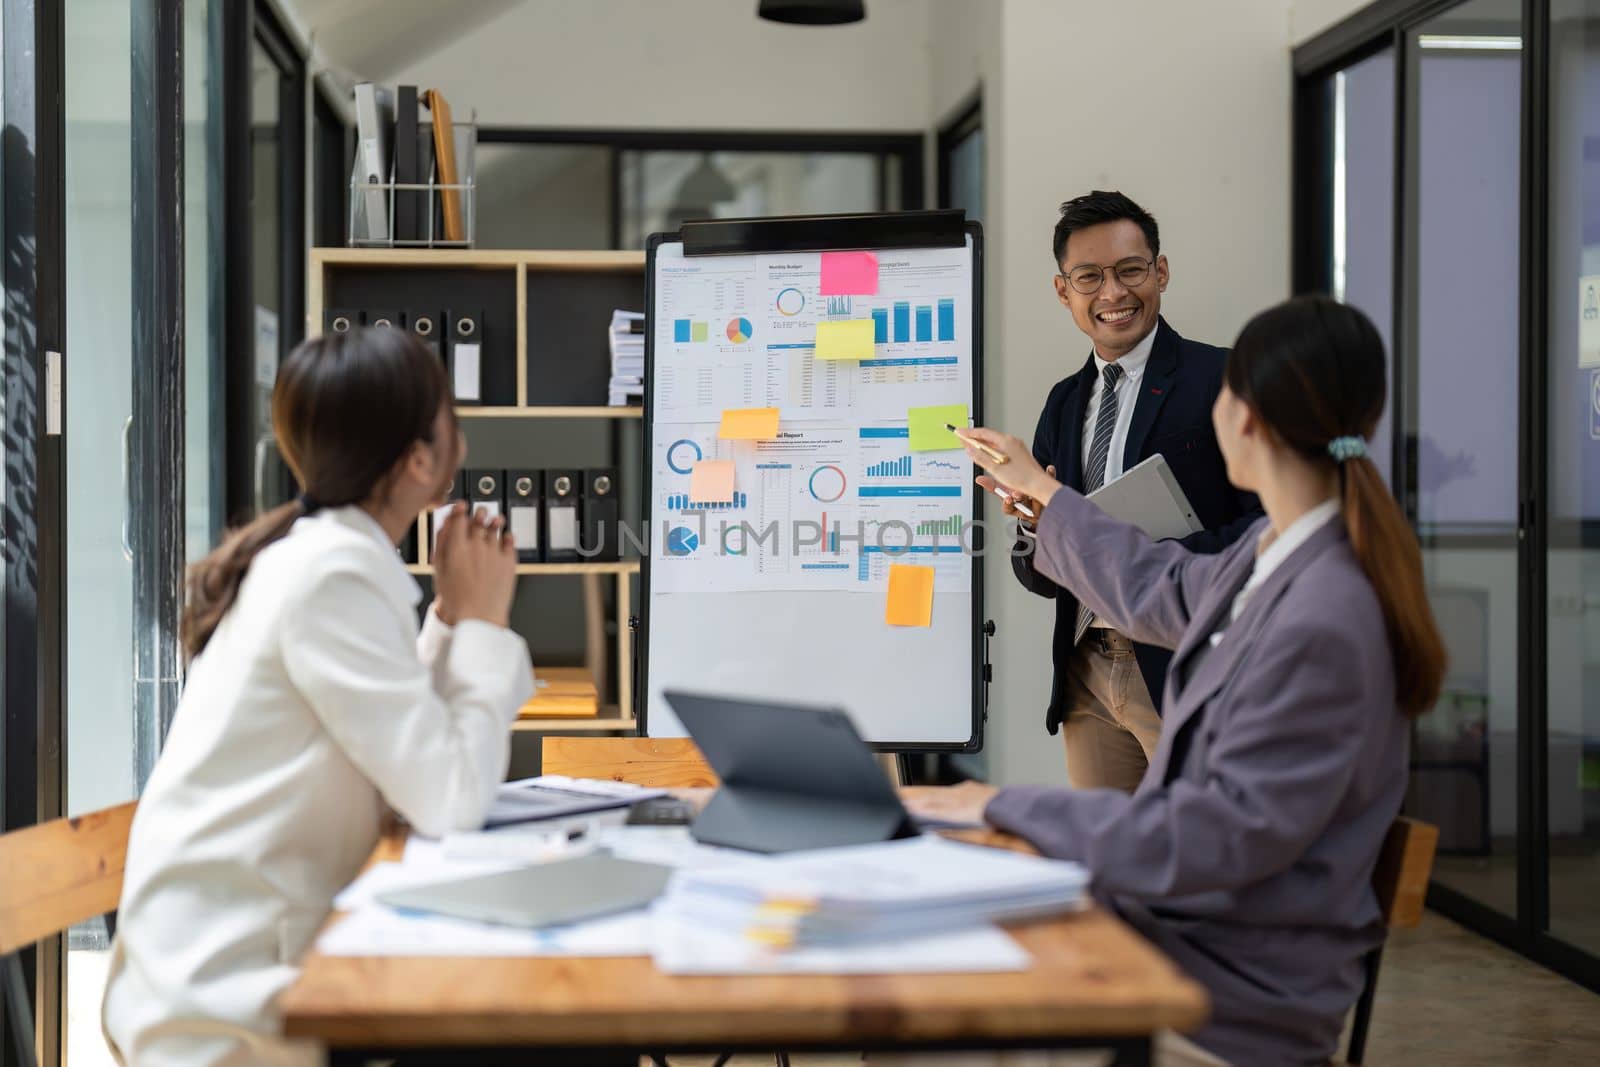 Business adviser explaining business plan strategy on flipchart to colleagues, male coach or adviser giving presentation at briefing, reporting about results or growing sales.